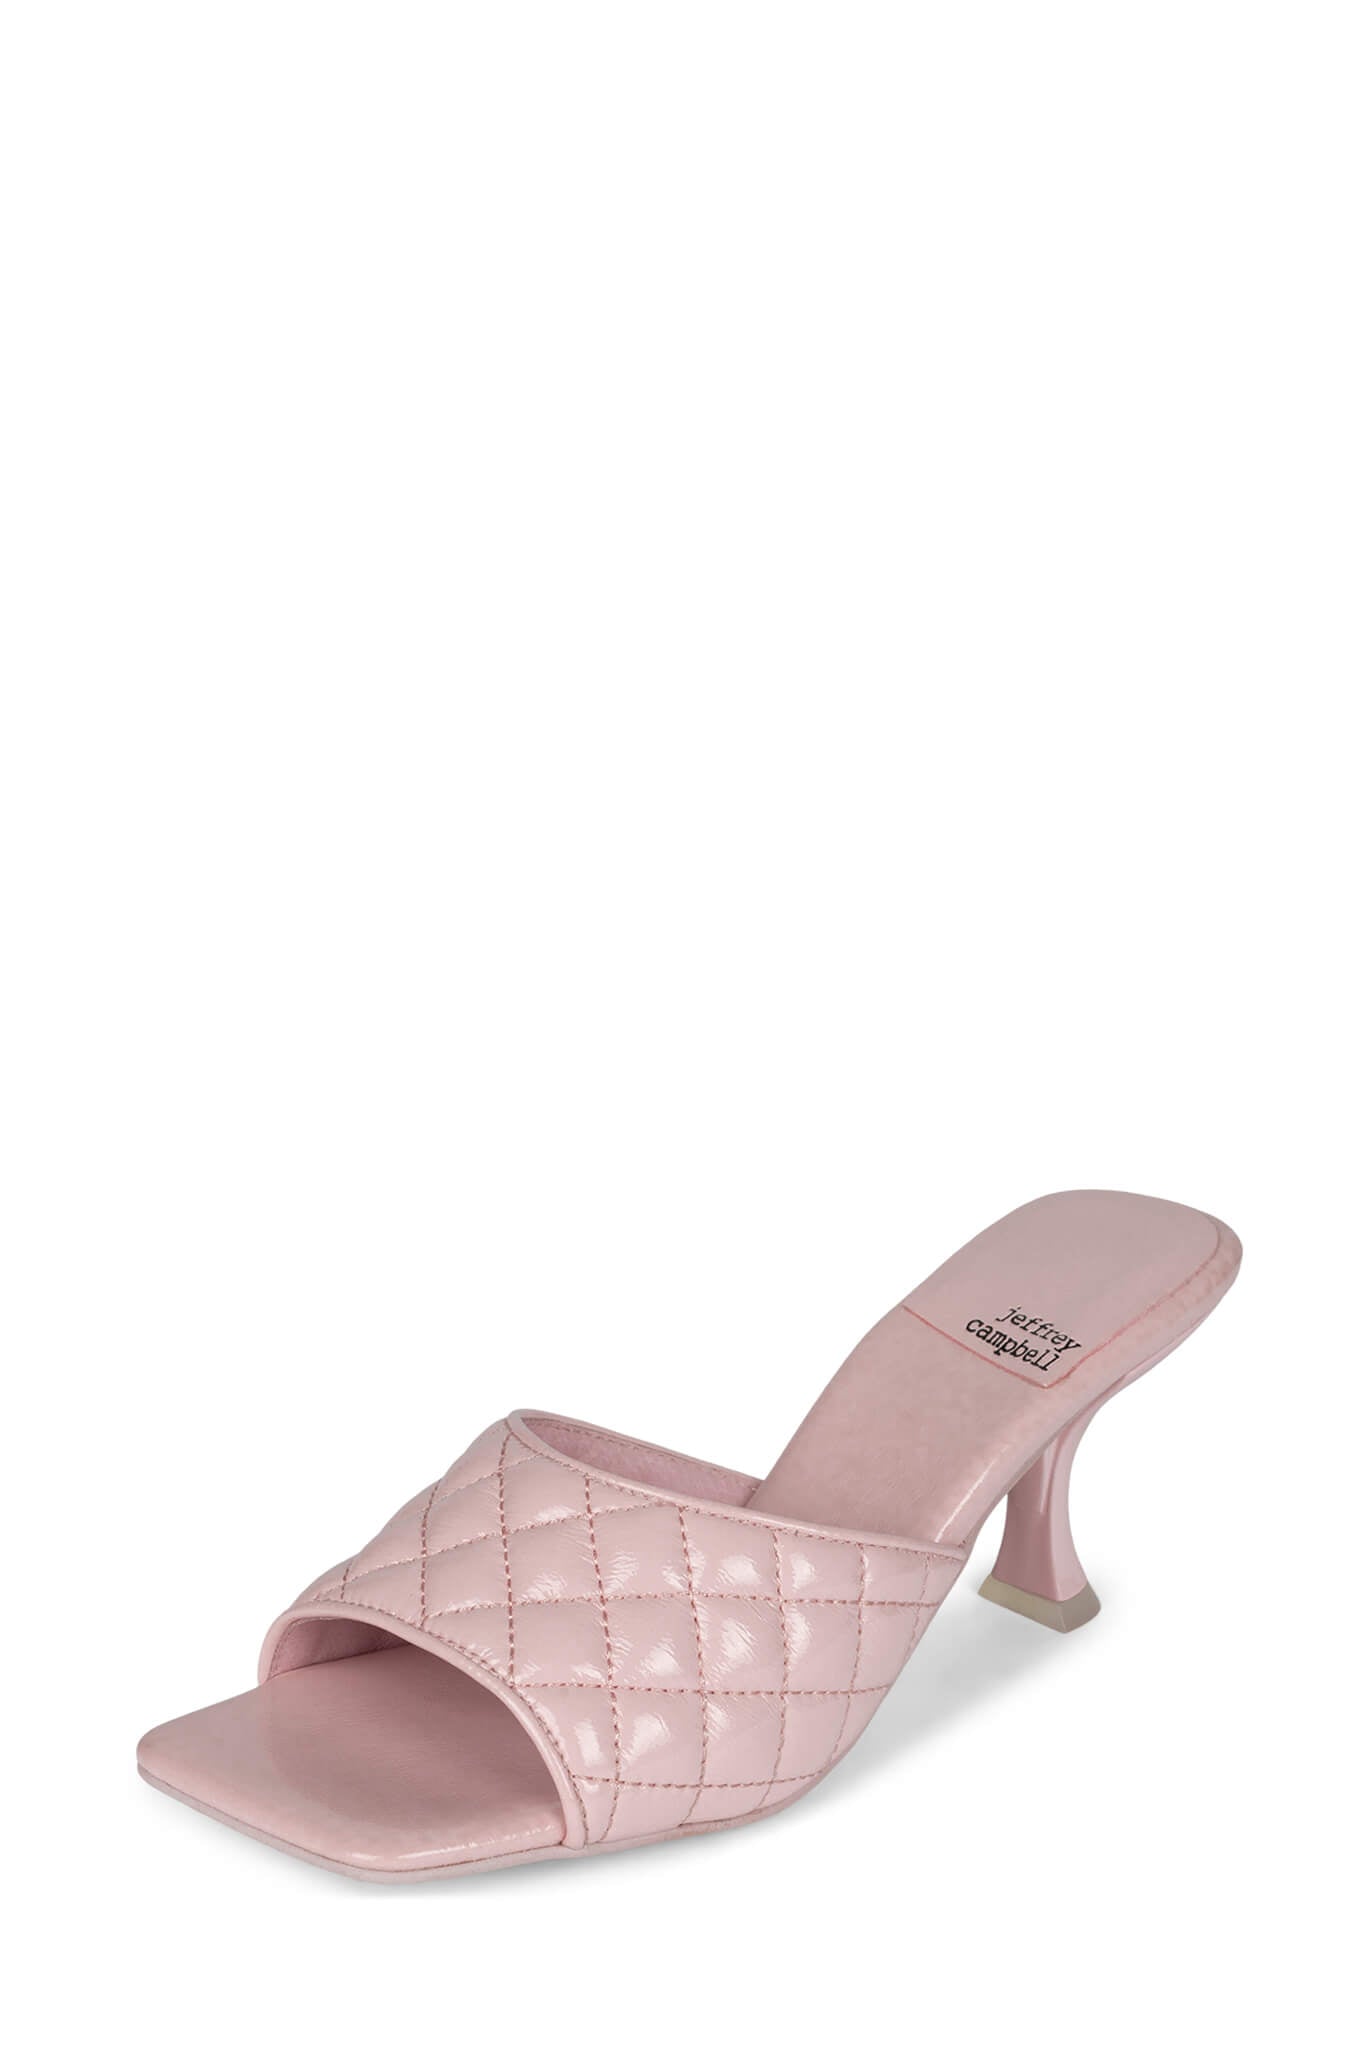 Load image into Gallery viewer, Mr. Big Q Light Pink Patent - Muse Shoe Studio
